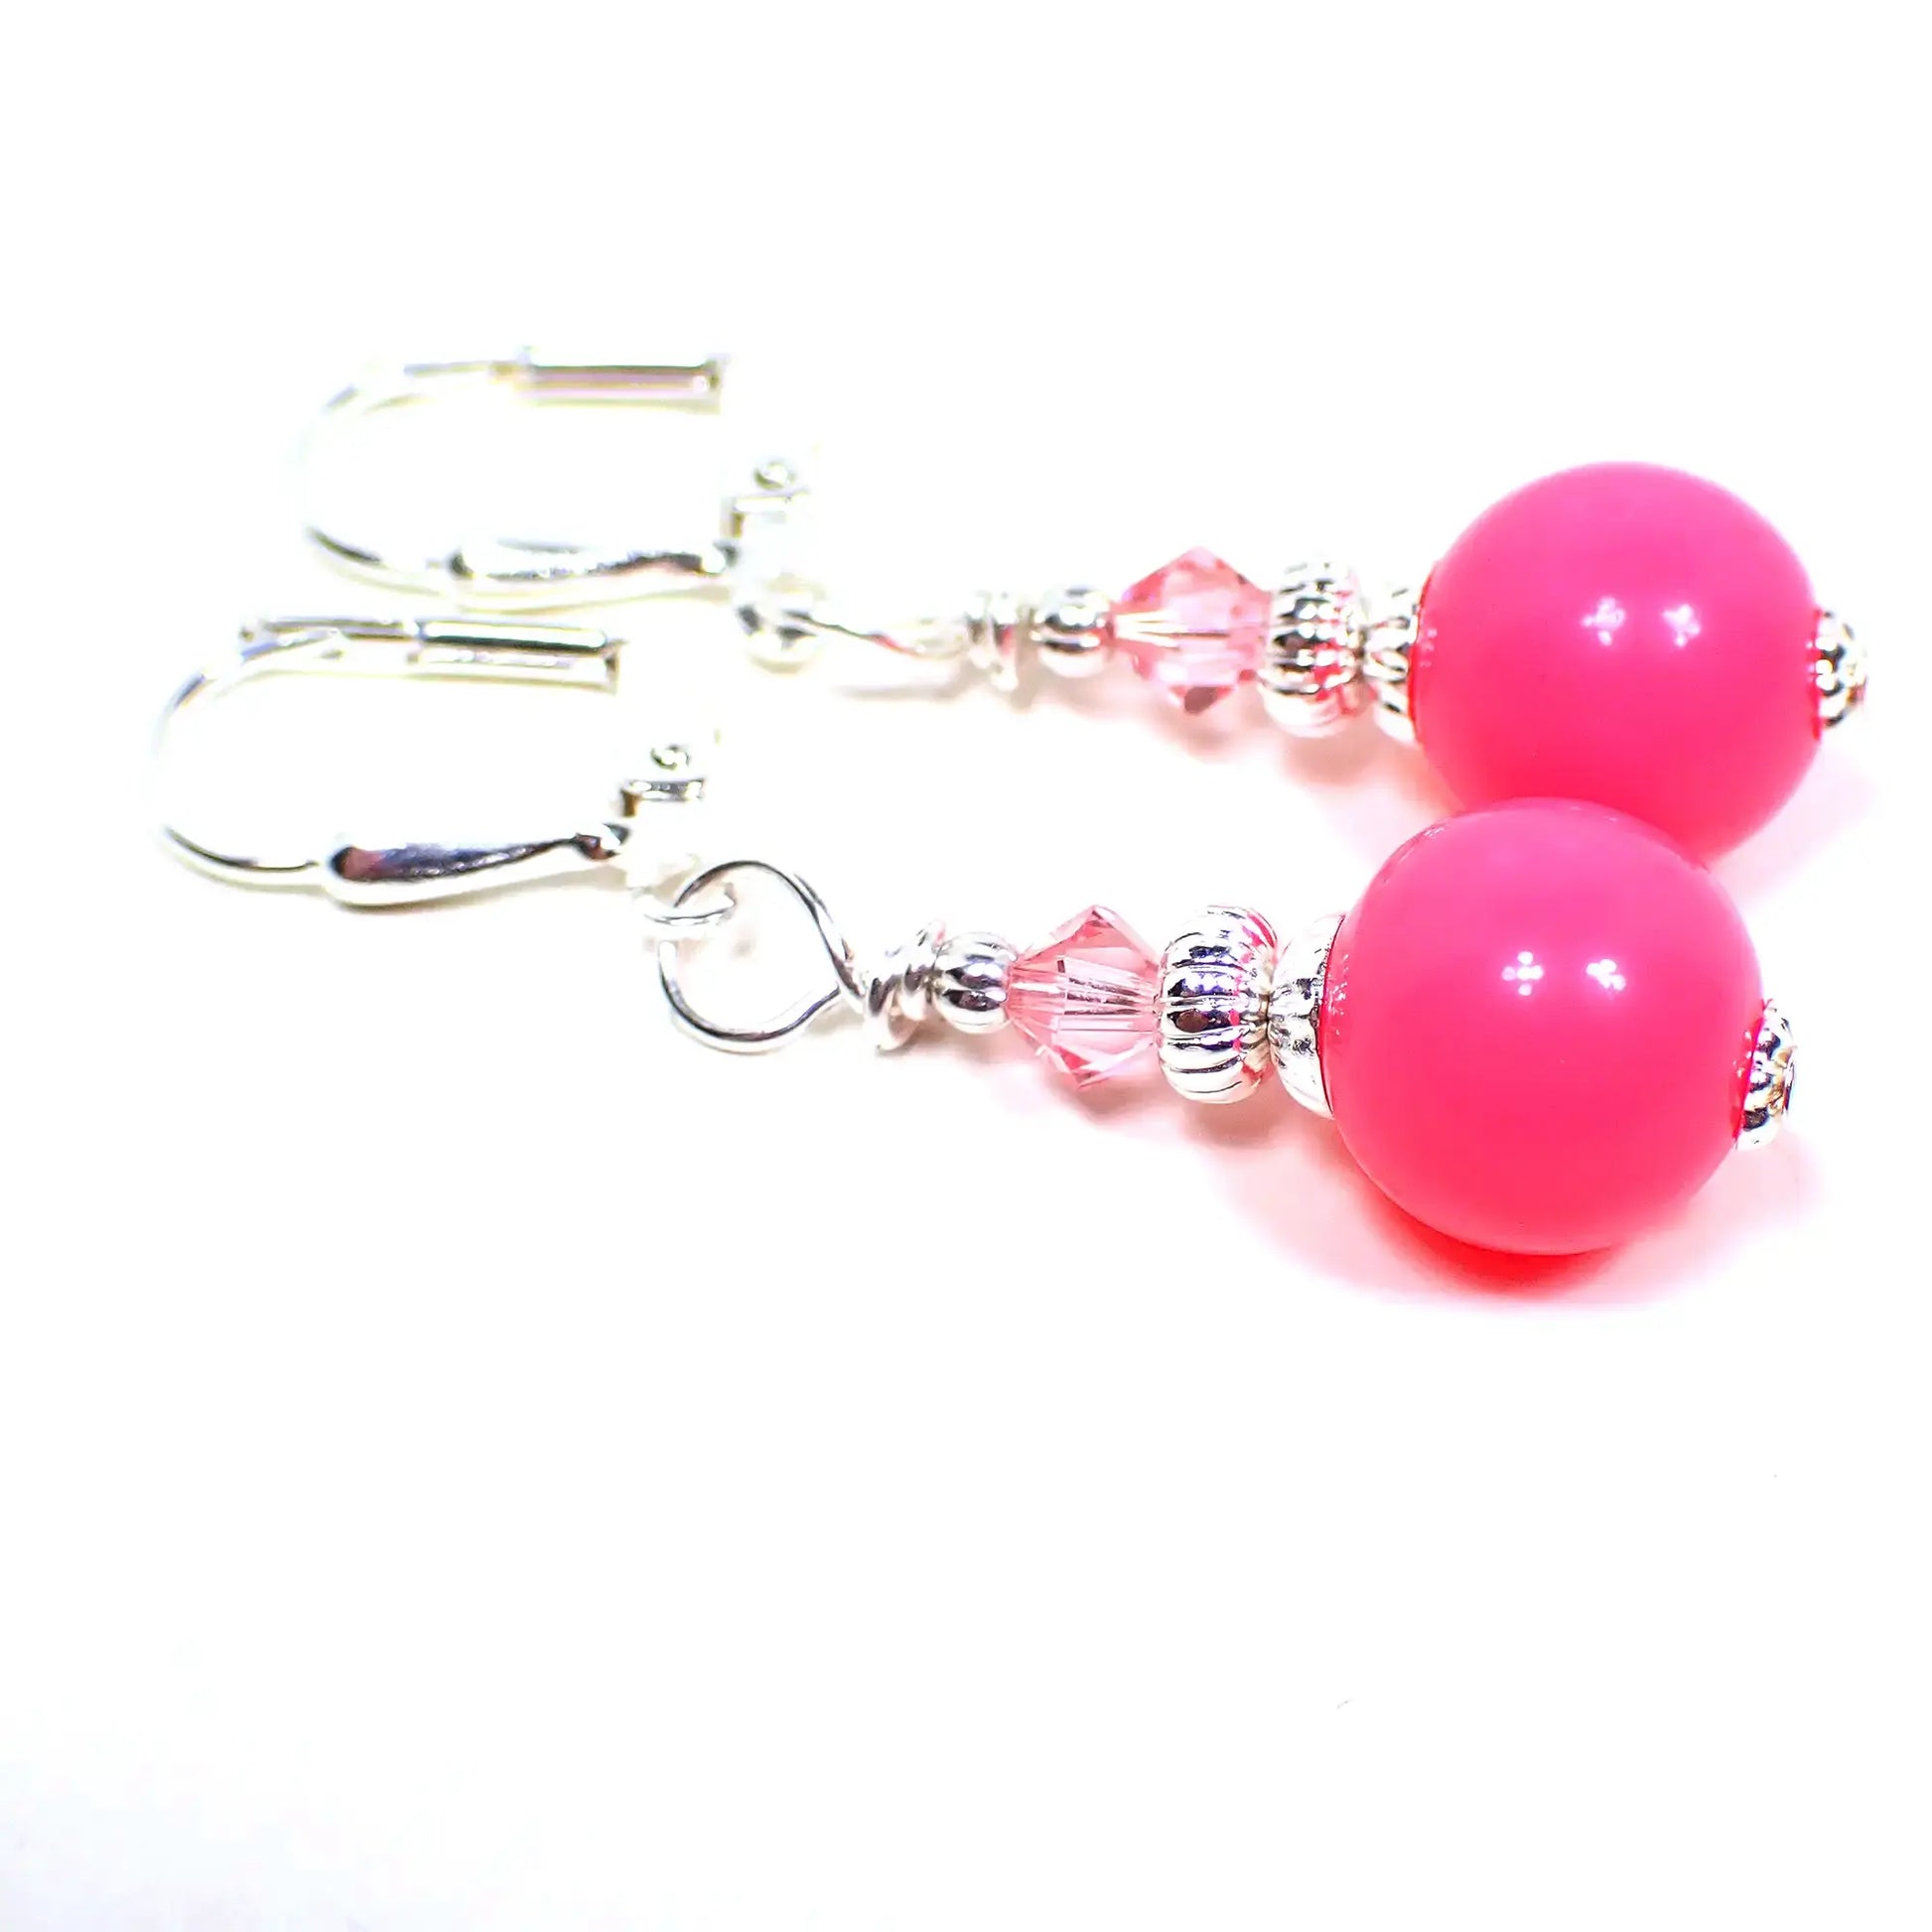 Top view of the handmade small drop earrings with vintage acrylic beads. The metal is bright silver in color. There is a faceted glass crystal bead in light pink at the top. The bottom acrylic beads are round ball shaped and are bright pink in color.